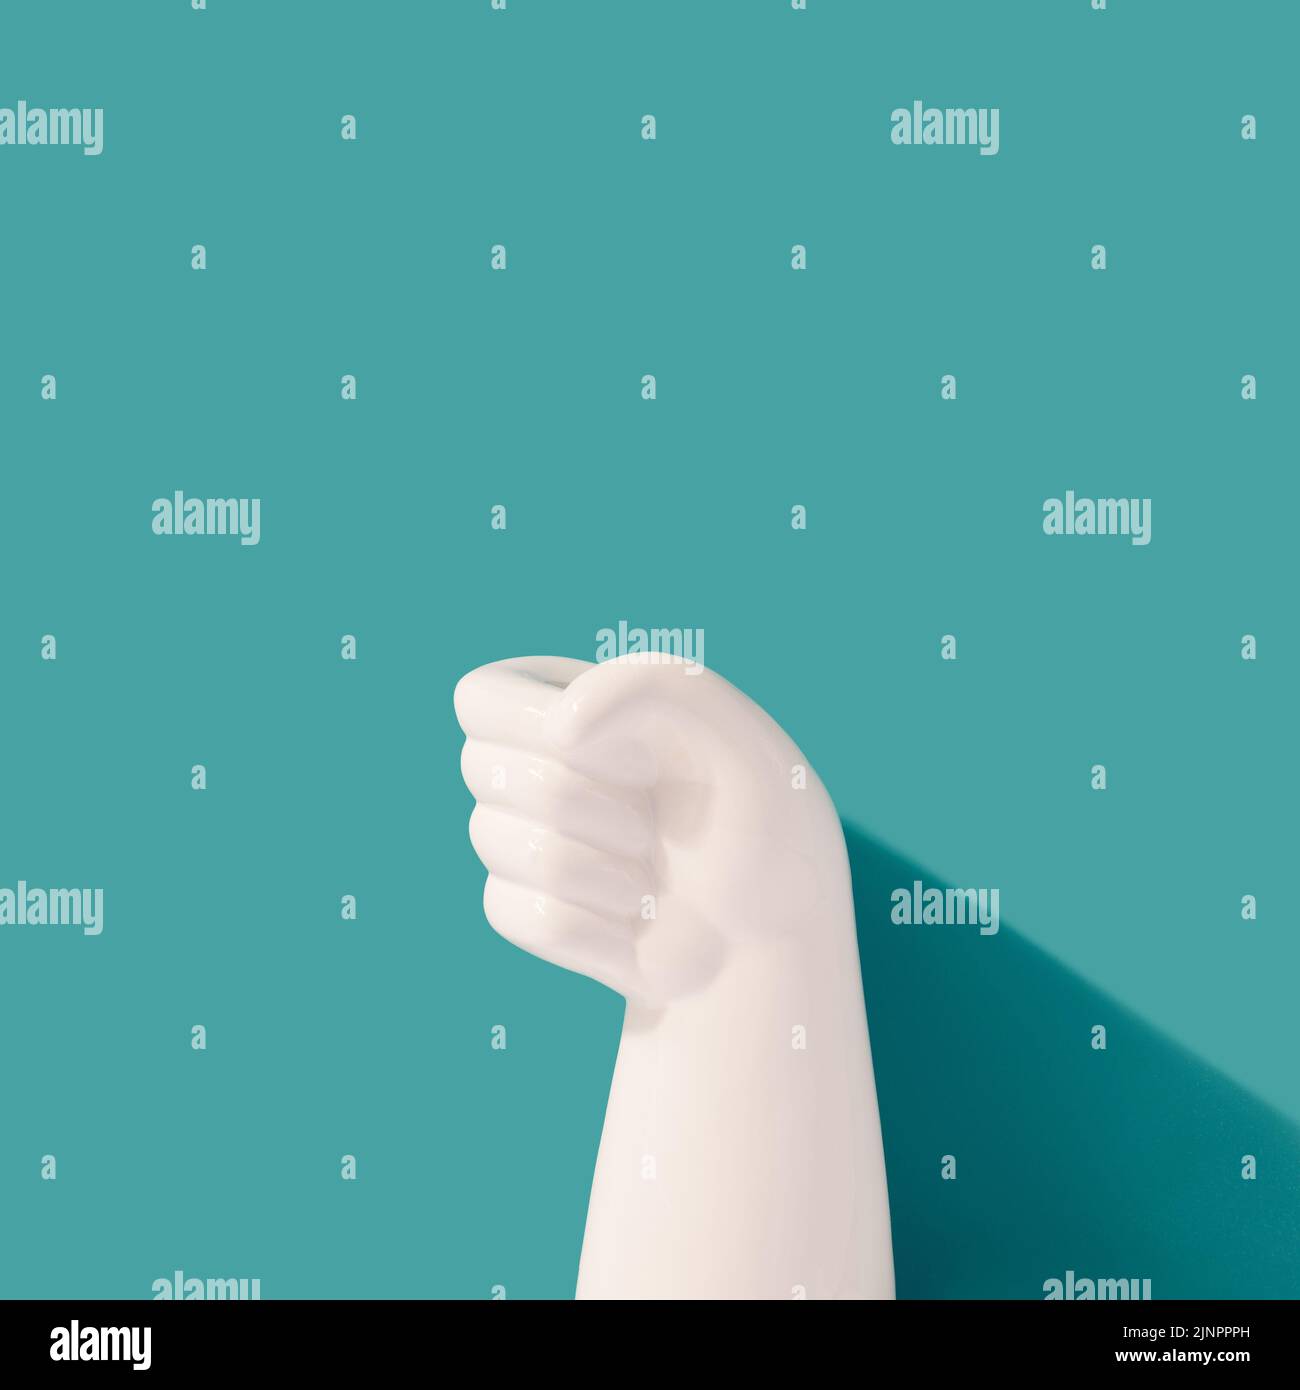 White plastic fist against the teal background. Gift, present minimal concept. Stock Photo